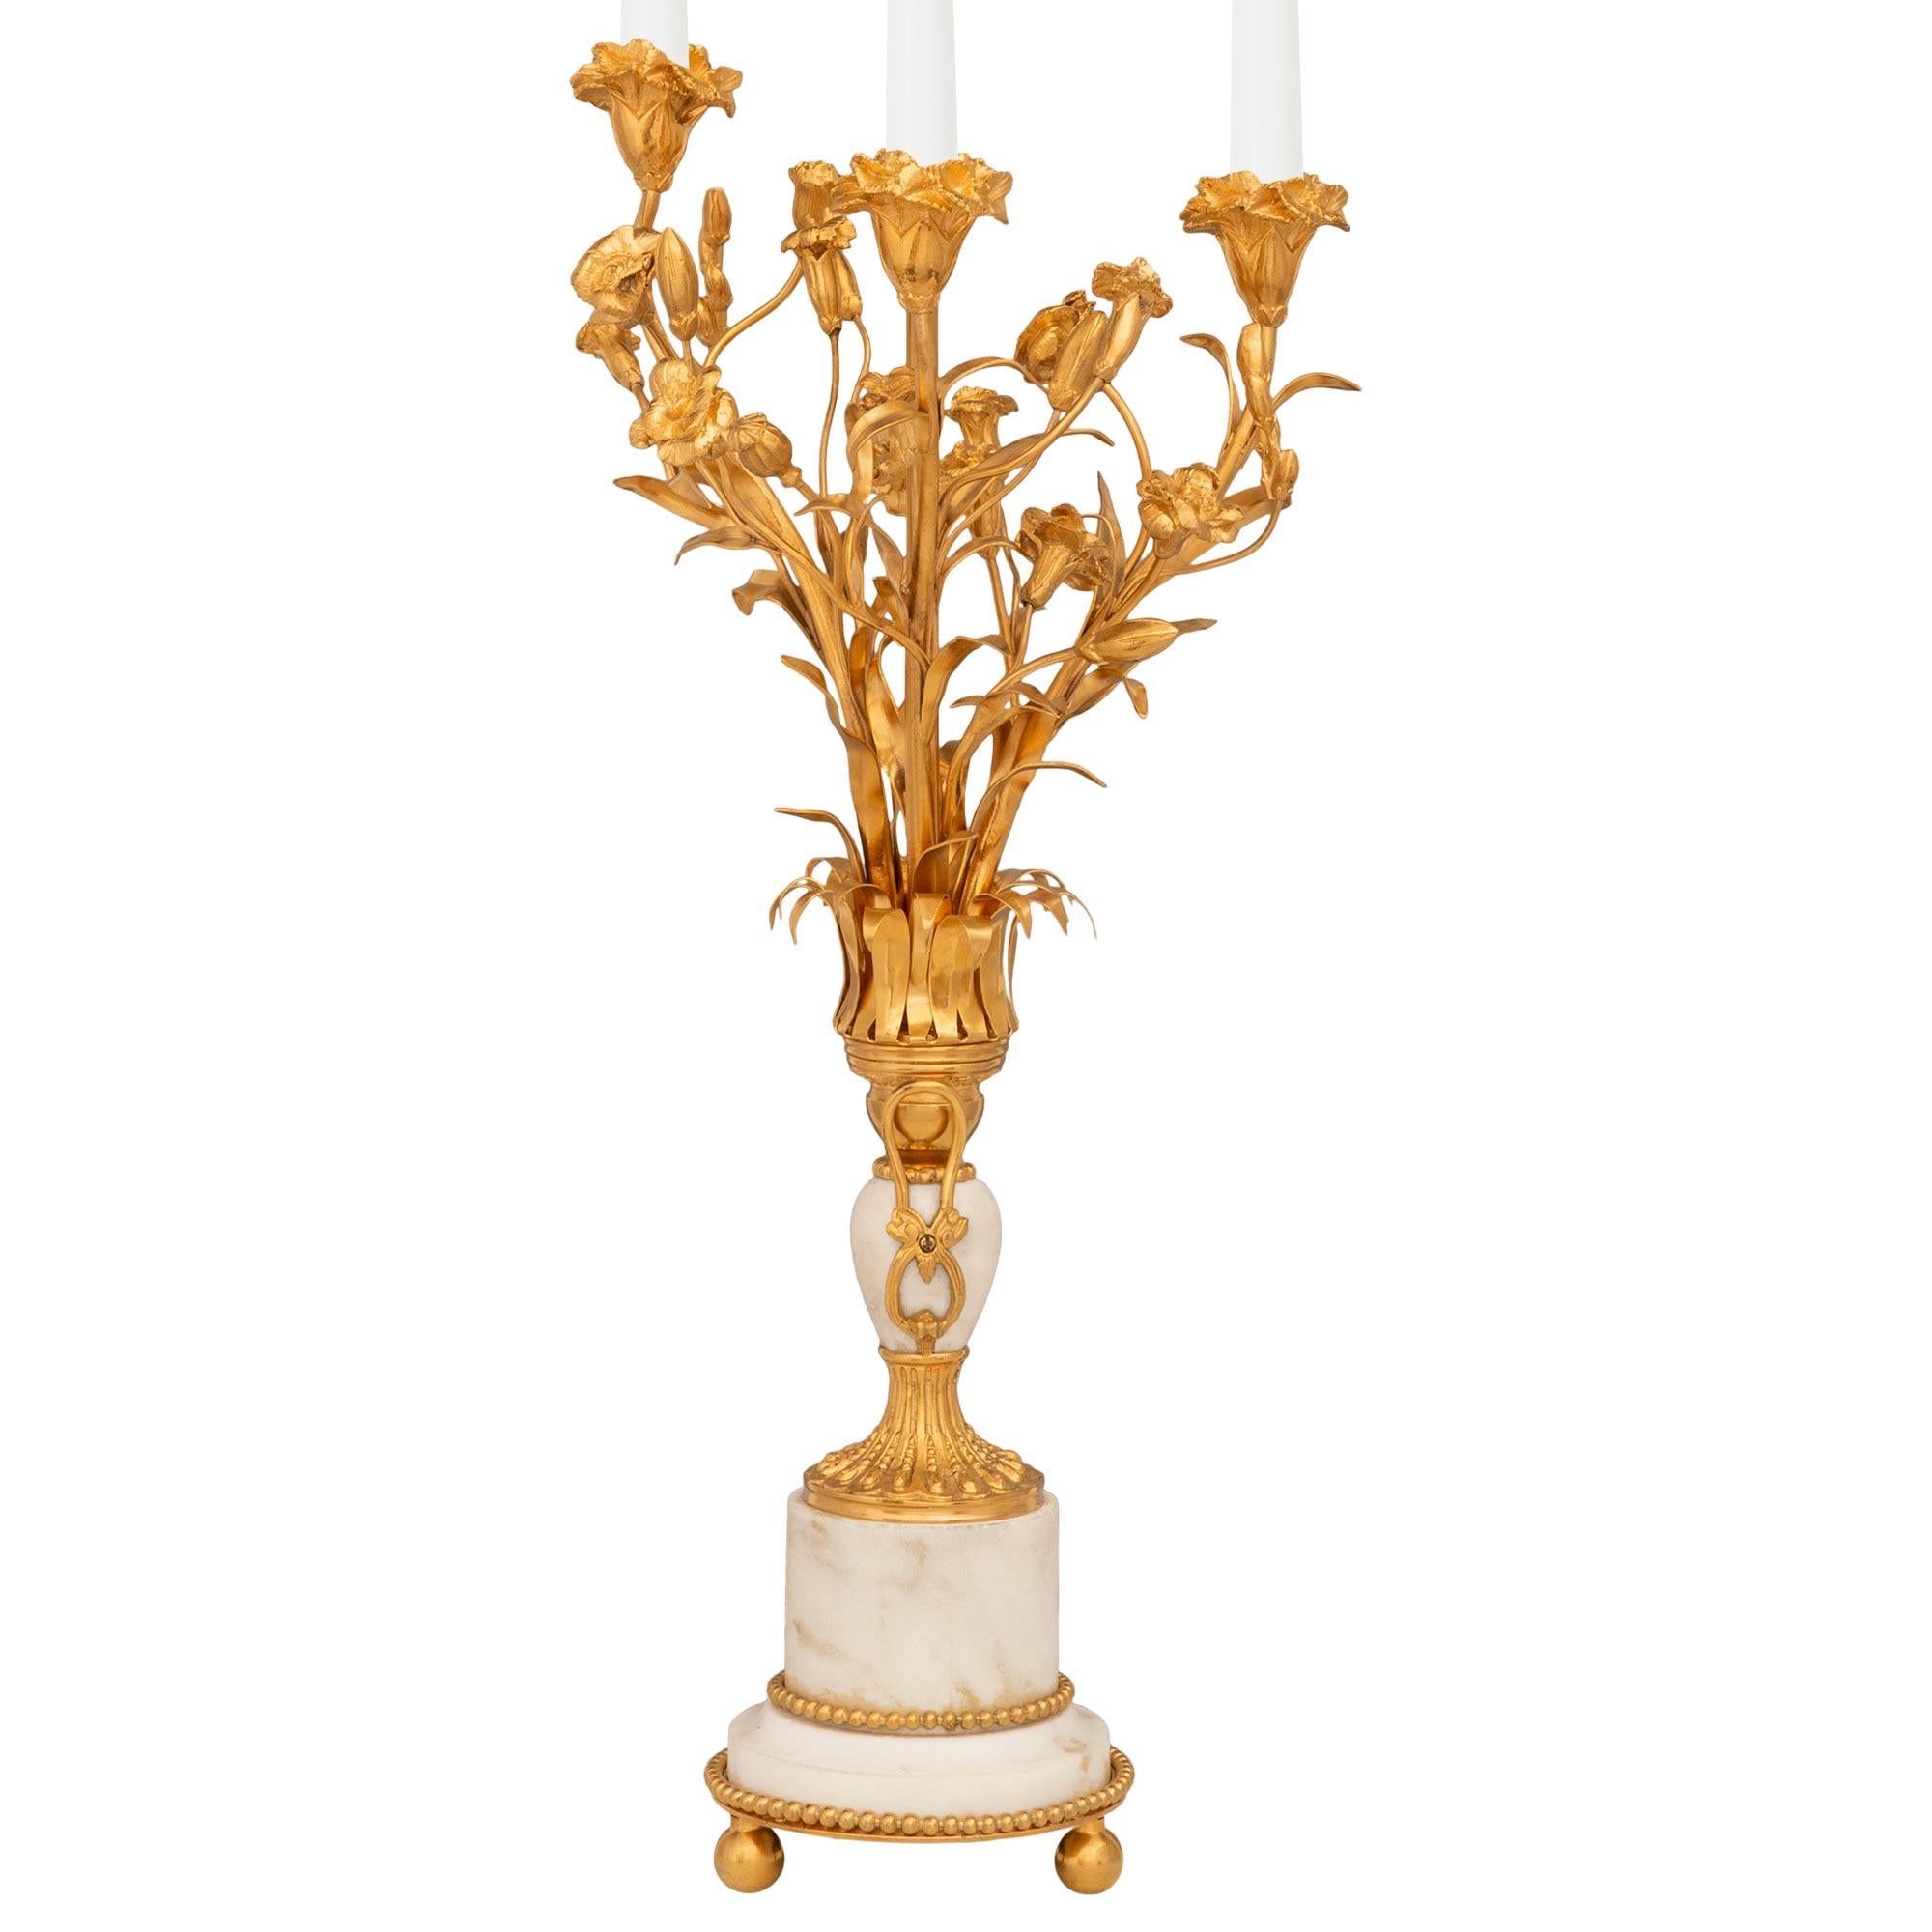 A stunning and high quality French 19th century Louis XVI st. Ormolu and white Carrara marble candelabra lamps. Each striking candelabra is supported by three ball feet below an Ormolu base plate which holds a white Carrara marble cylindrical